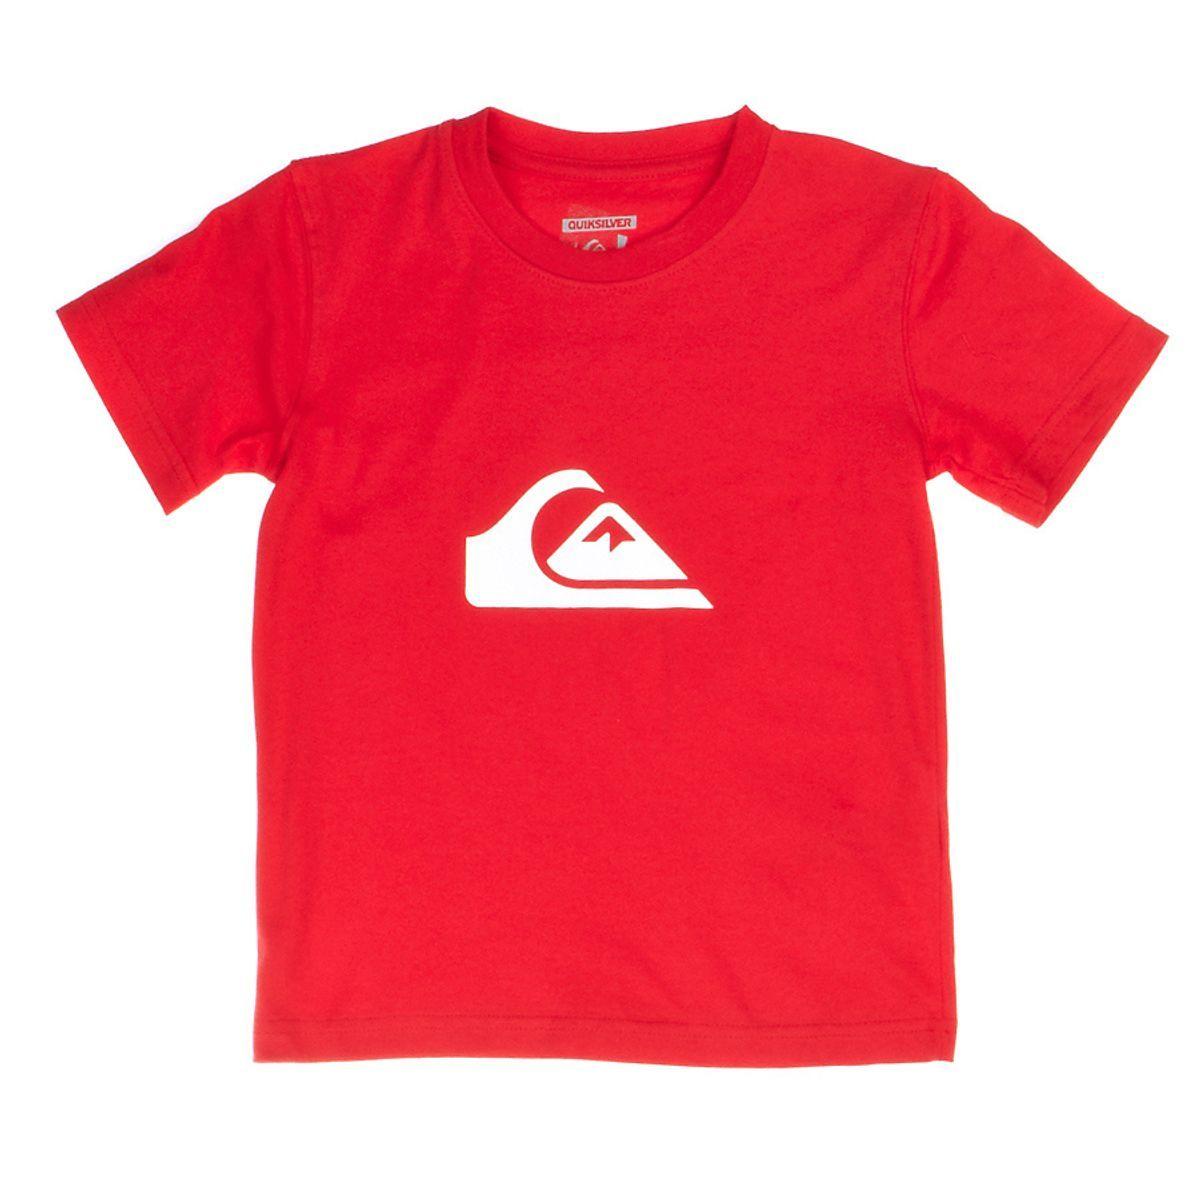 Wave and Red Mountain Logo - Quiksilver Logo Mountain And Waves Toddler T-Shirt - Quik Red | Free ...